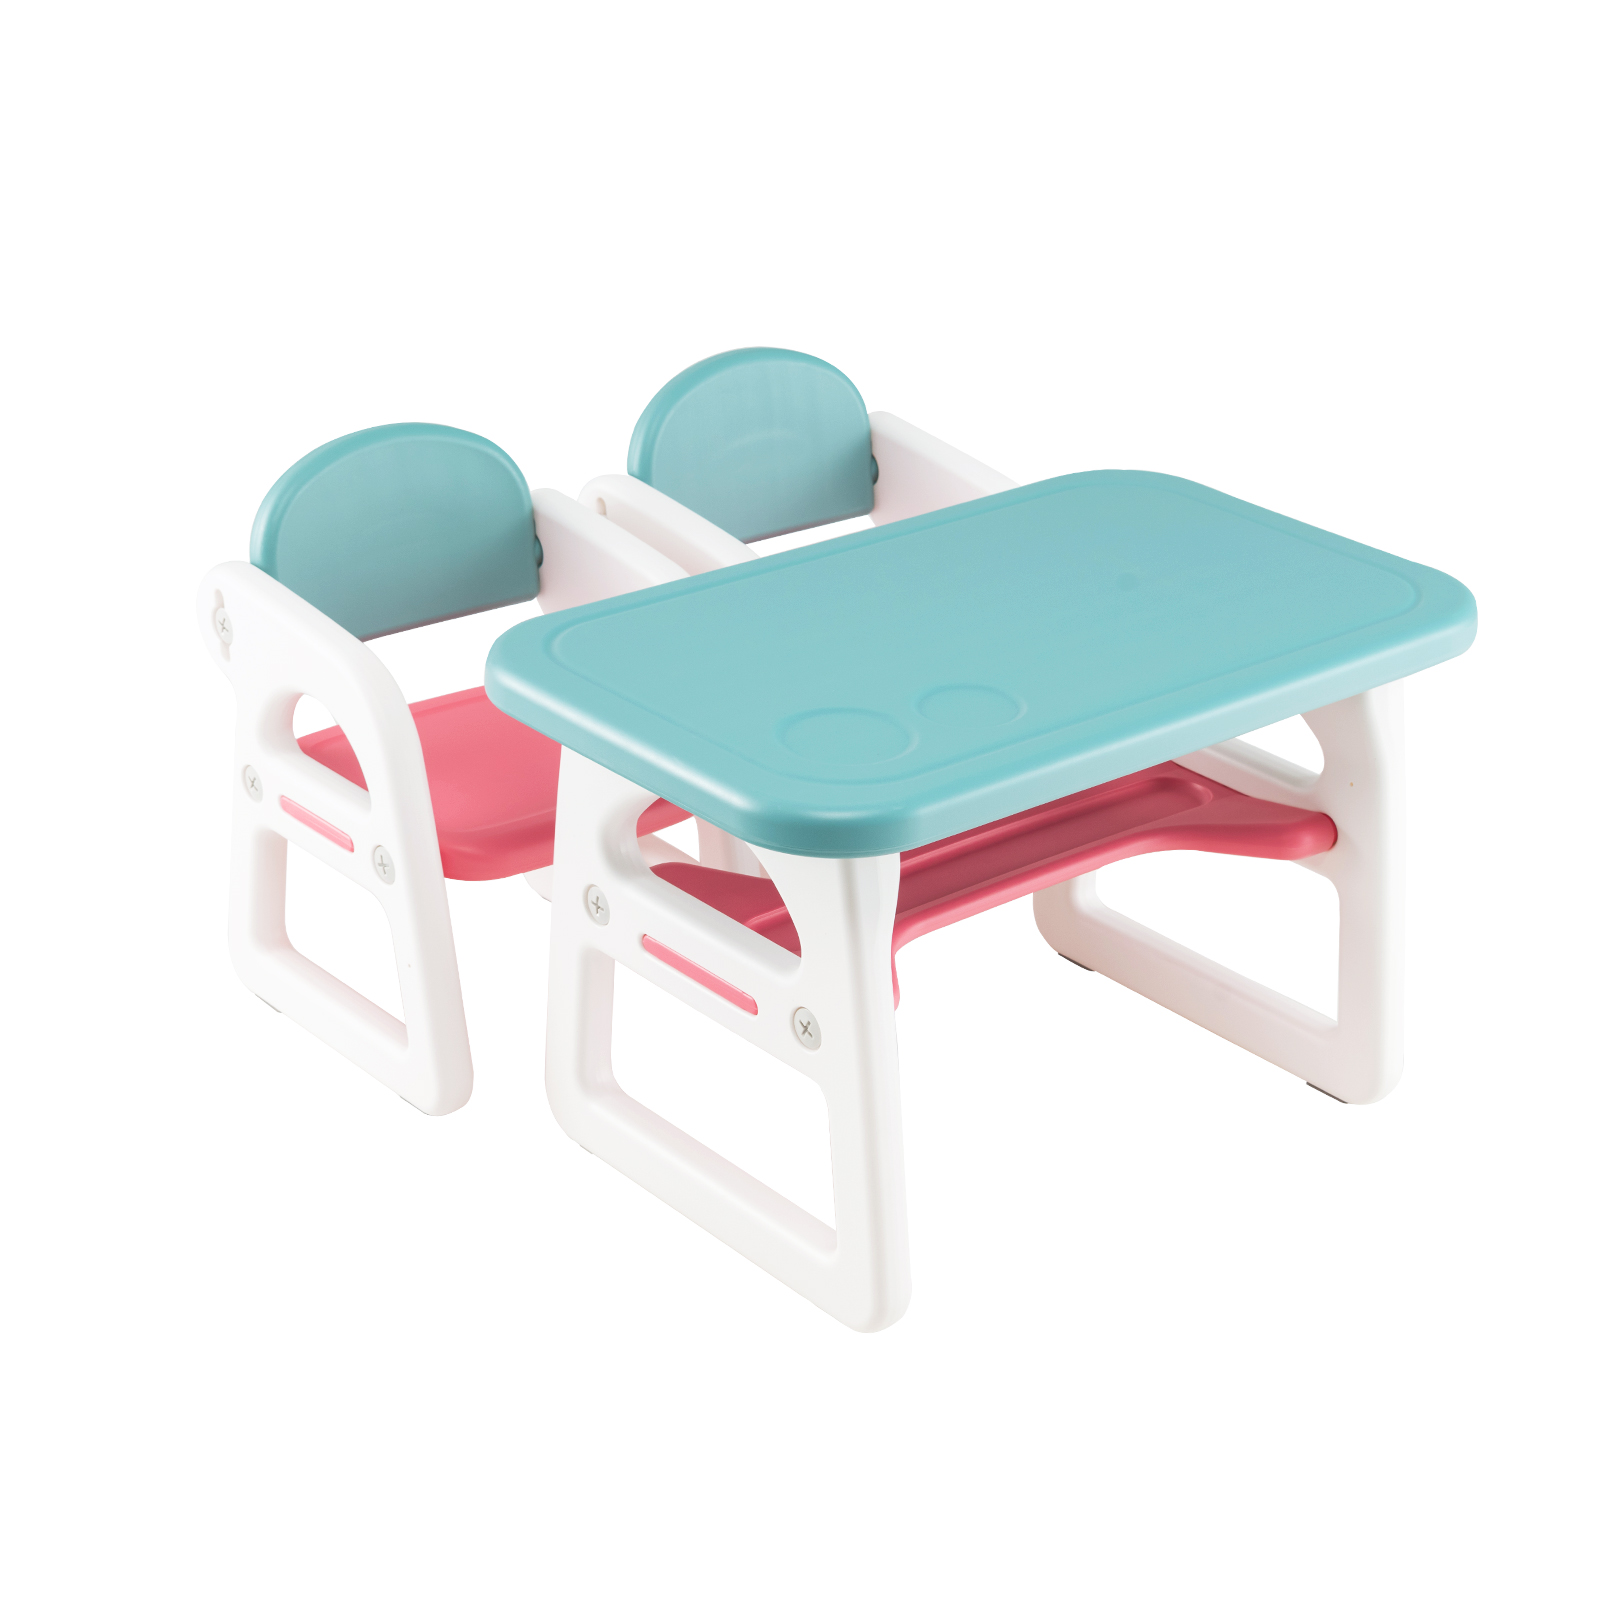 3-Piece Kids Table and Chairs Set with Storage Rack-Blue